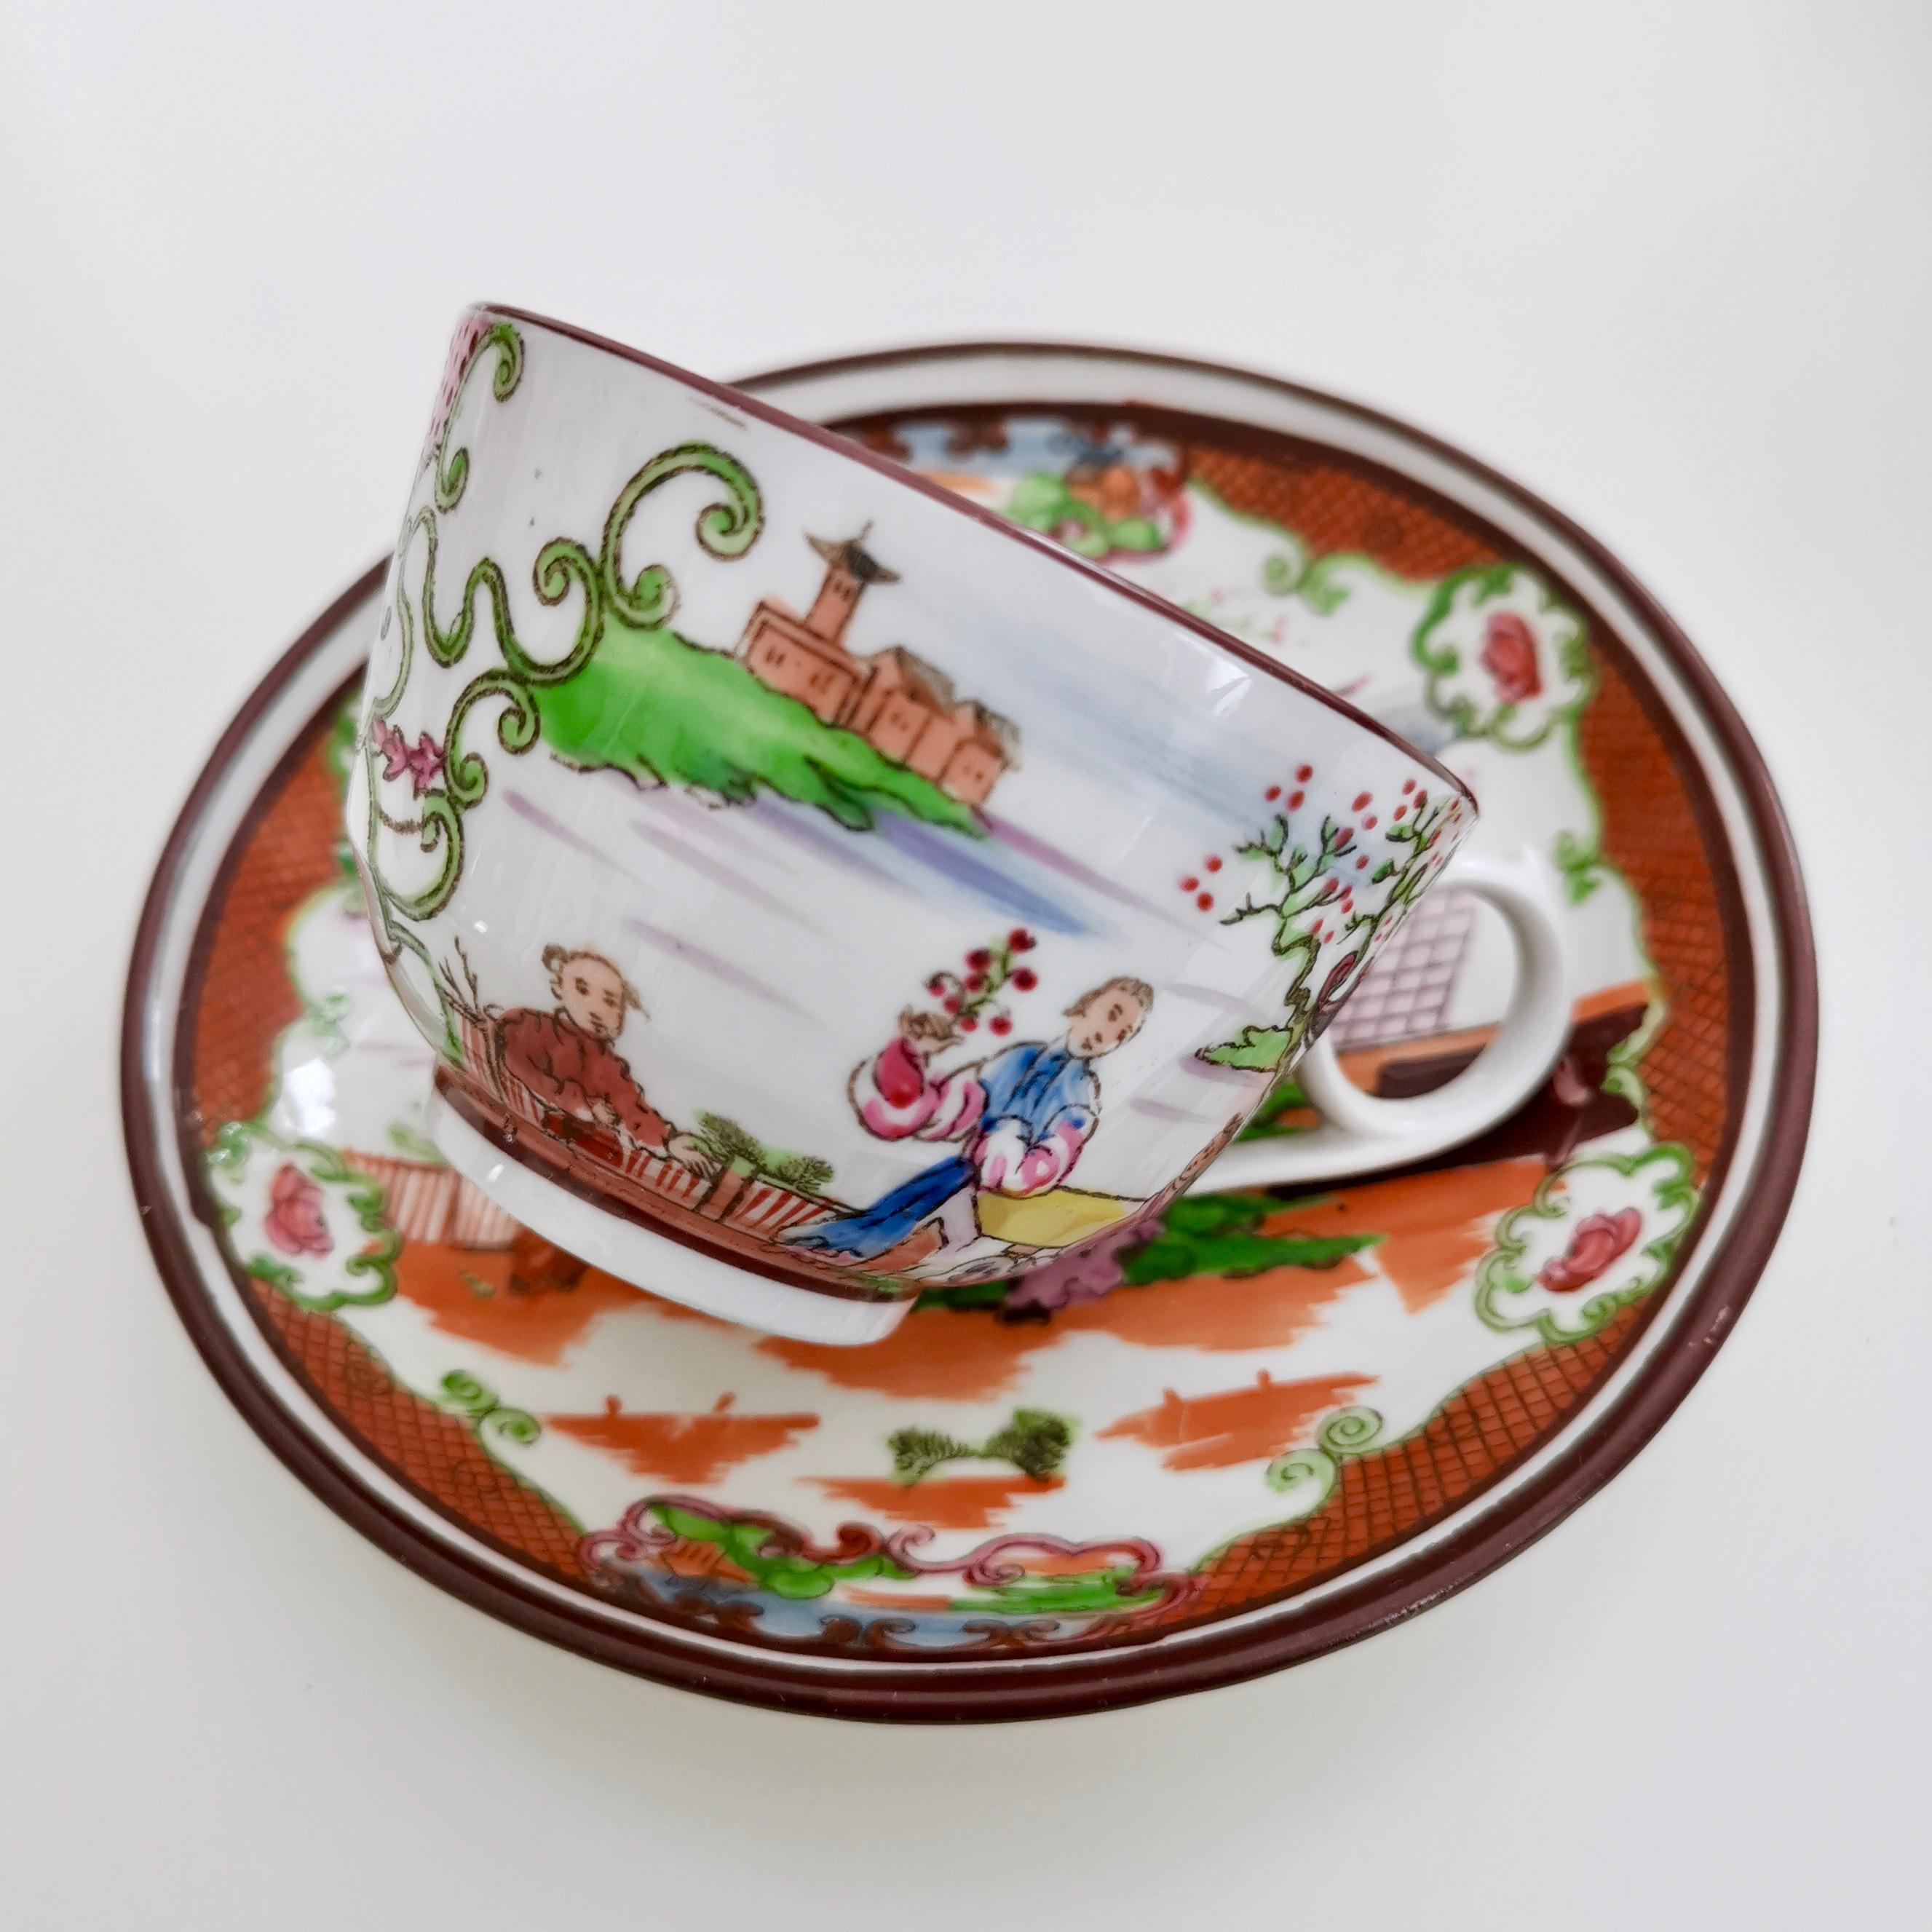 Hand-Painted Miles Mason Porcelain Teacup Trio Boy at the Door Pattern Chinoiserie circa 1805